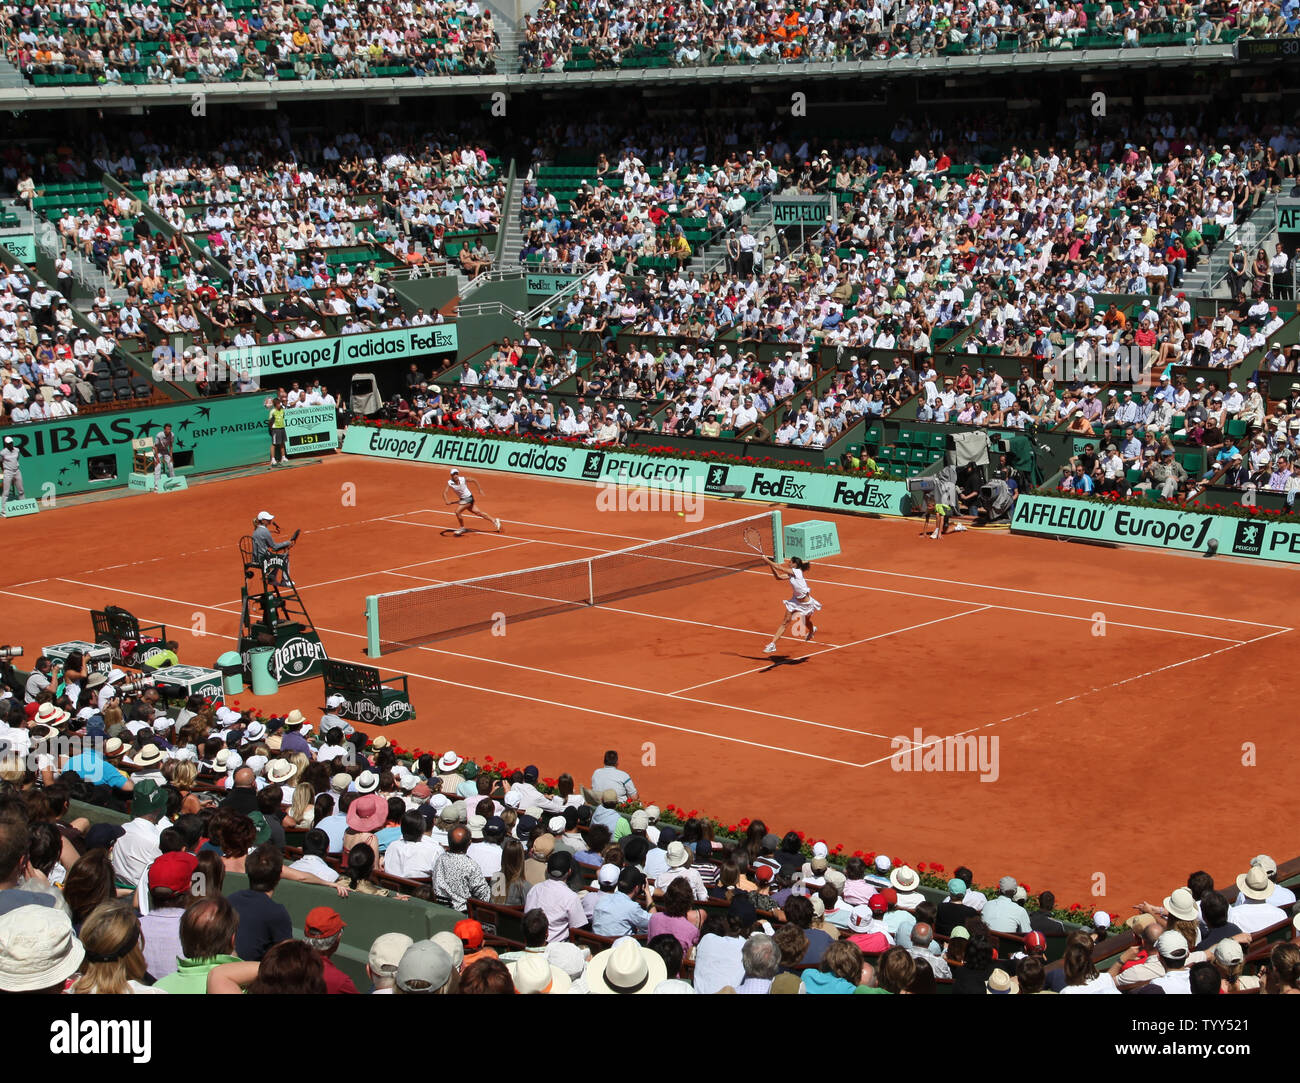 Virginie Razzano of France hits a shot during her French Open third-round match against Tathiana Garbin of Italy at Roland Garros in Paris on May 30, 2009.  Razzano defeated Garbin 7-5, 7-5.   (UPI Photo/ David Silpa) Stock Photo